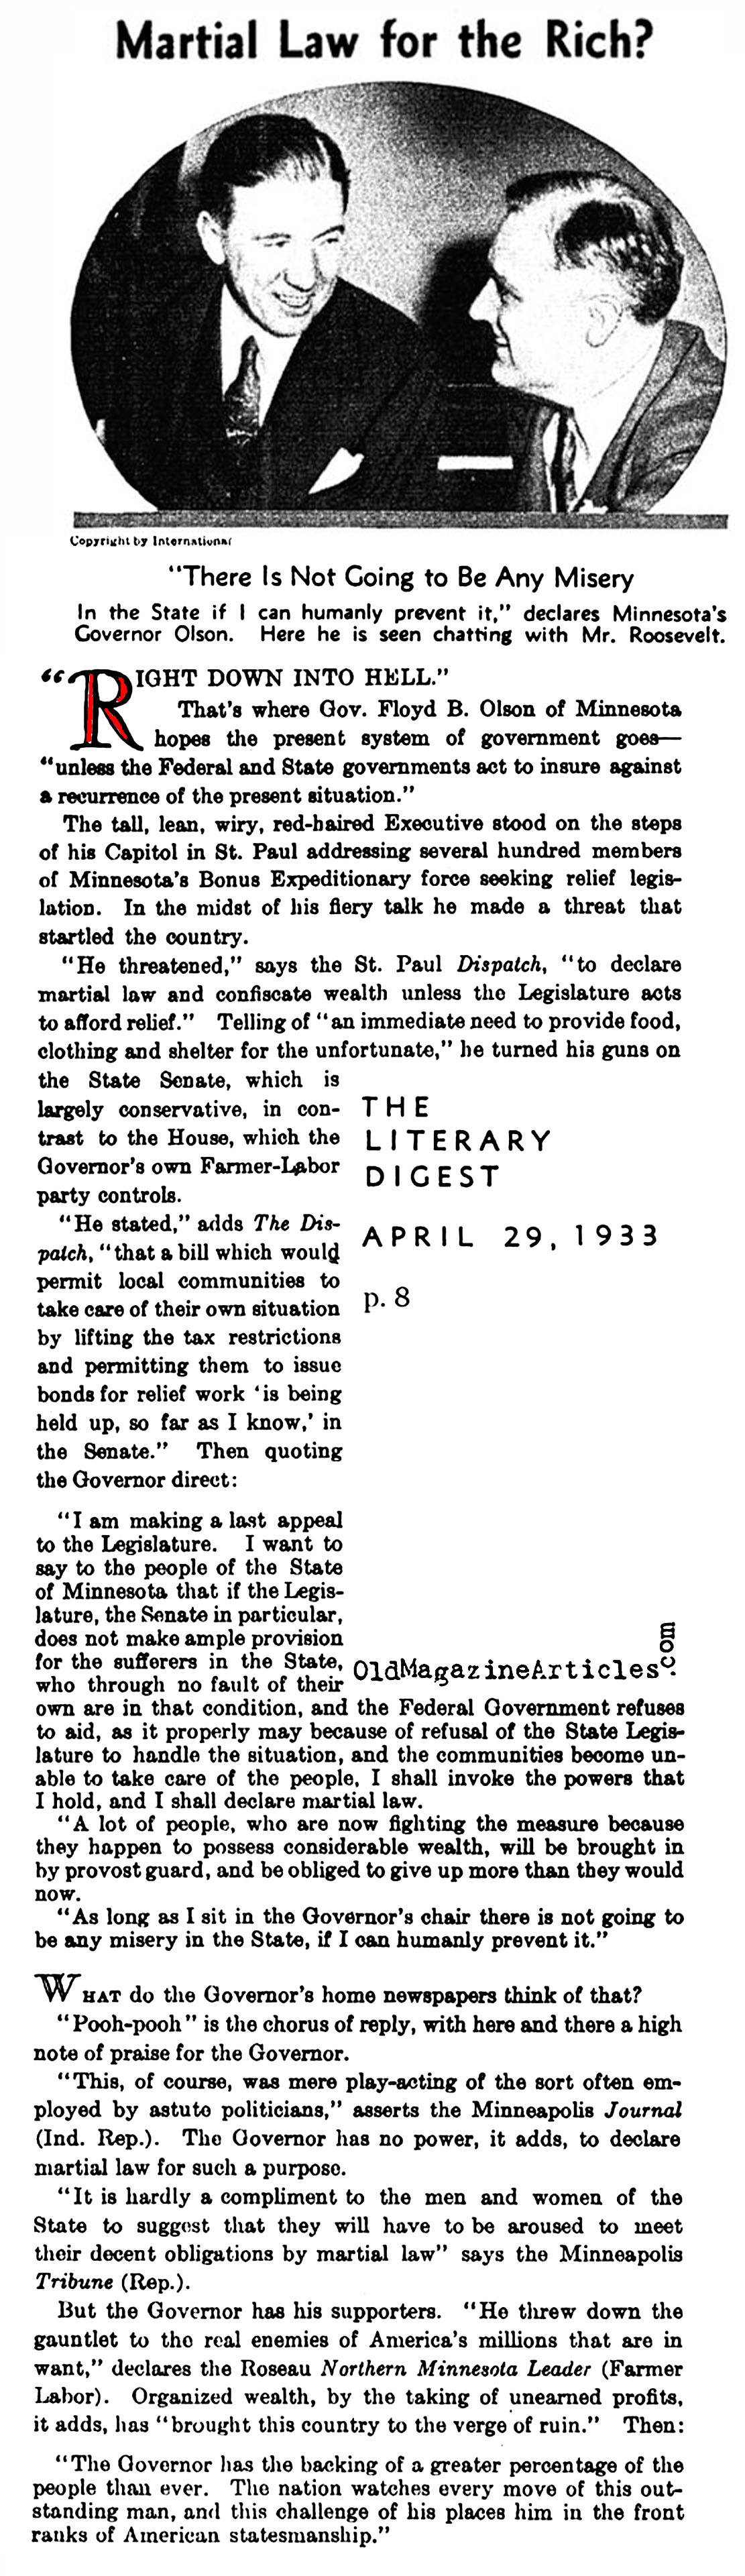 The Governor Who Threatened Martial Law (Literary Digest, 1933)